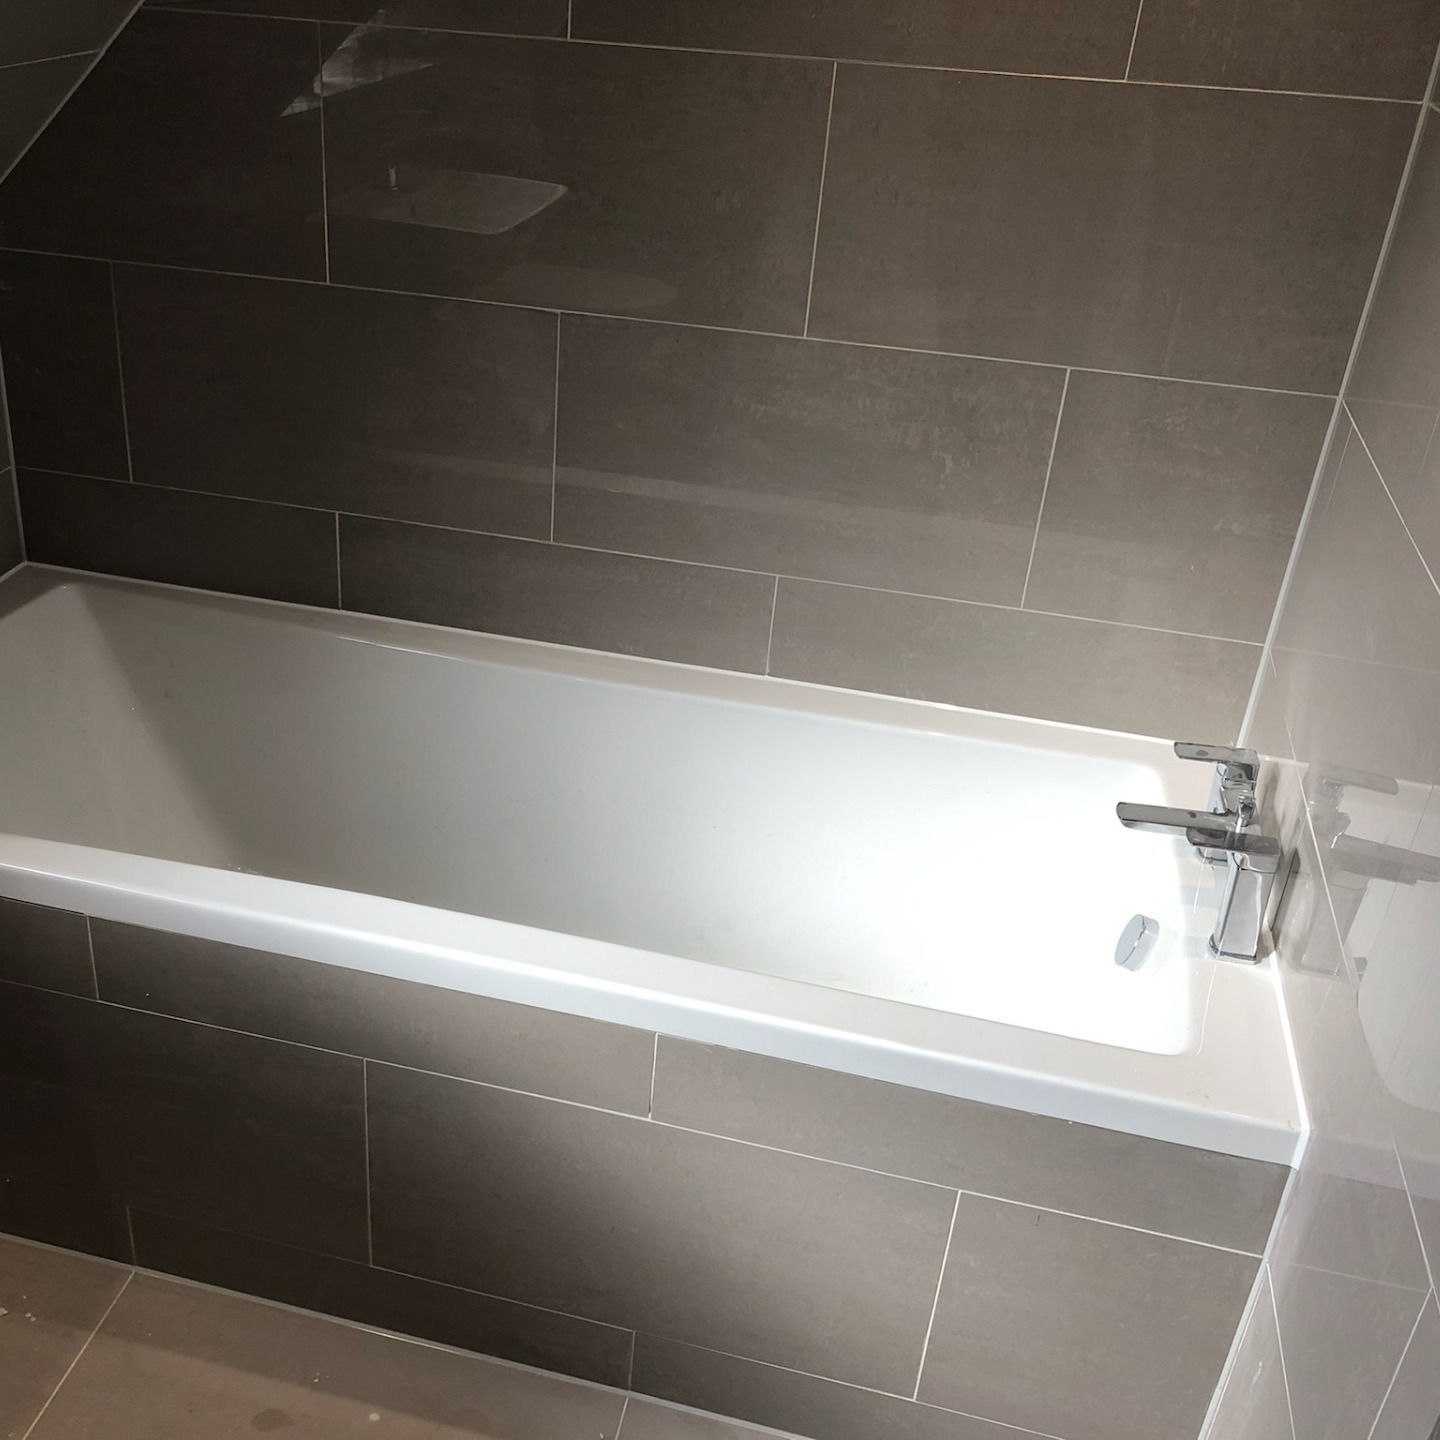 Bath with white mastic around horizontal and vertical joins